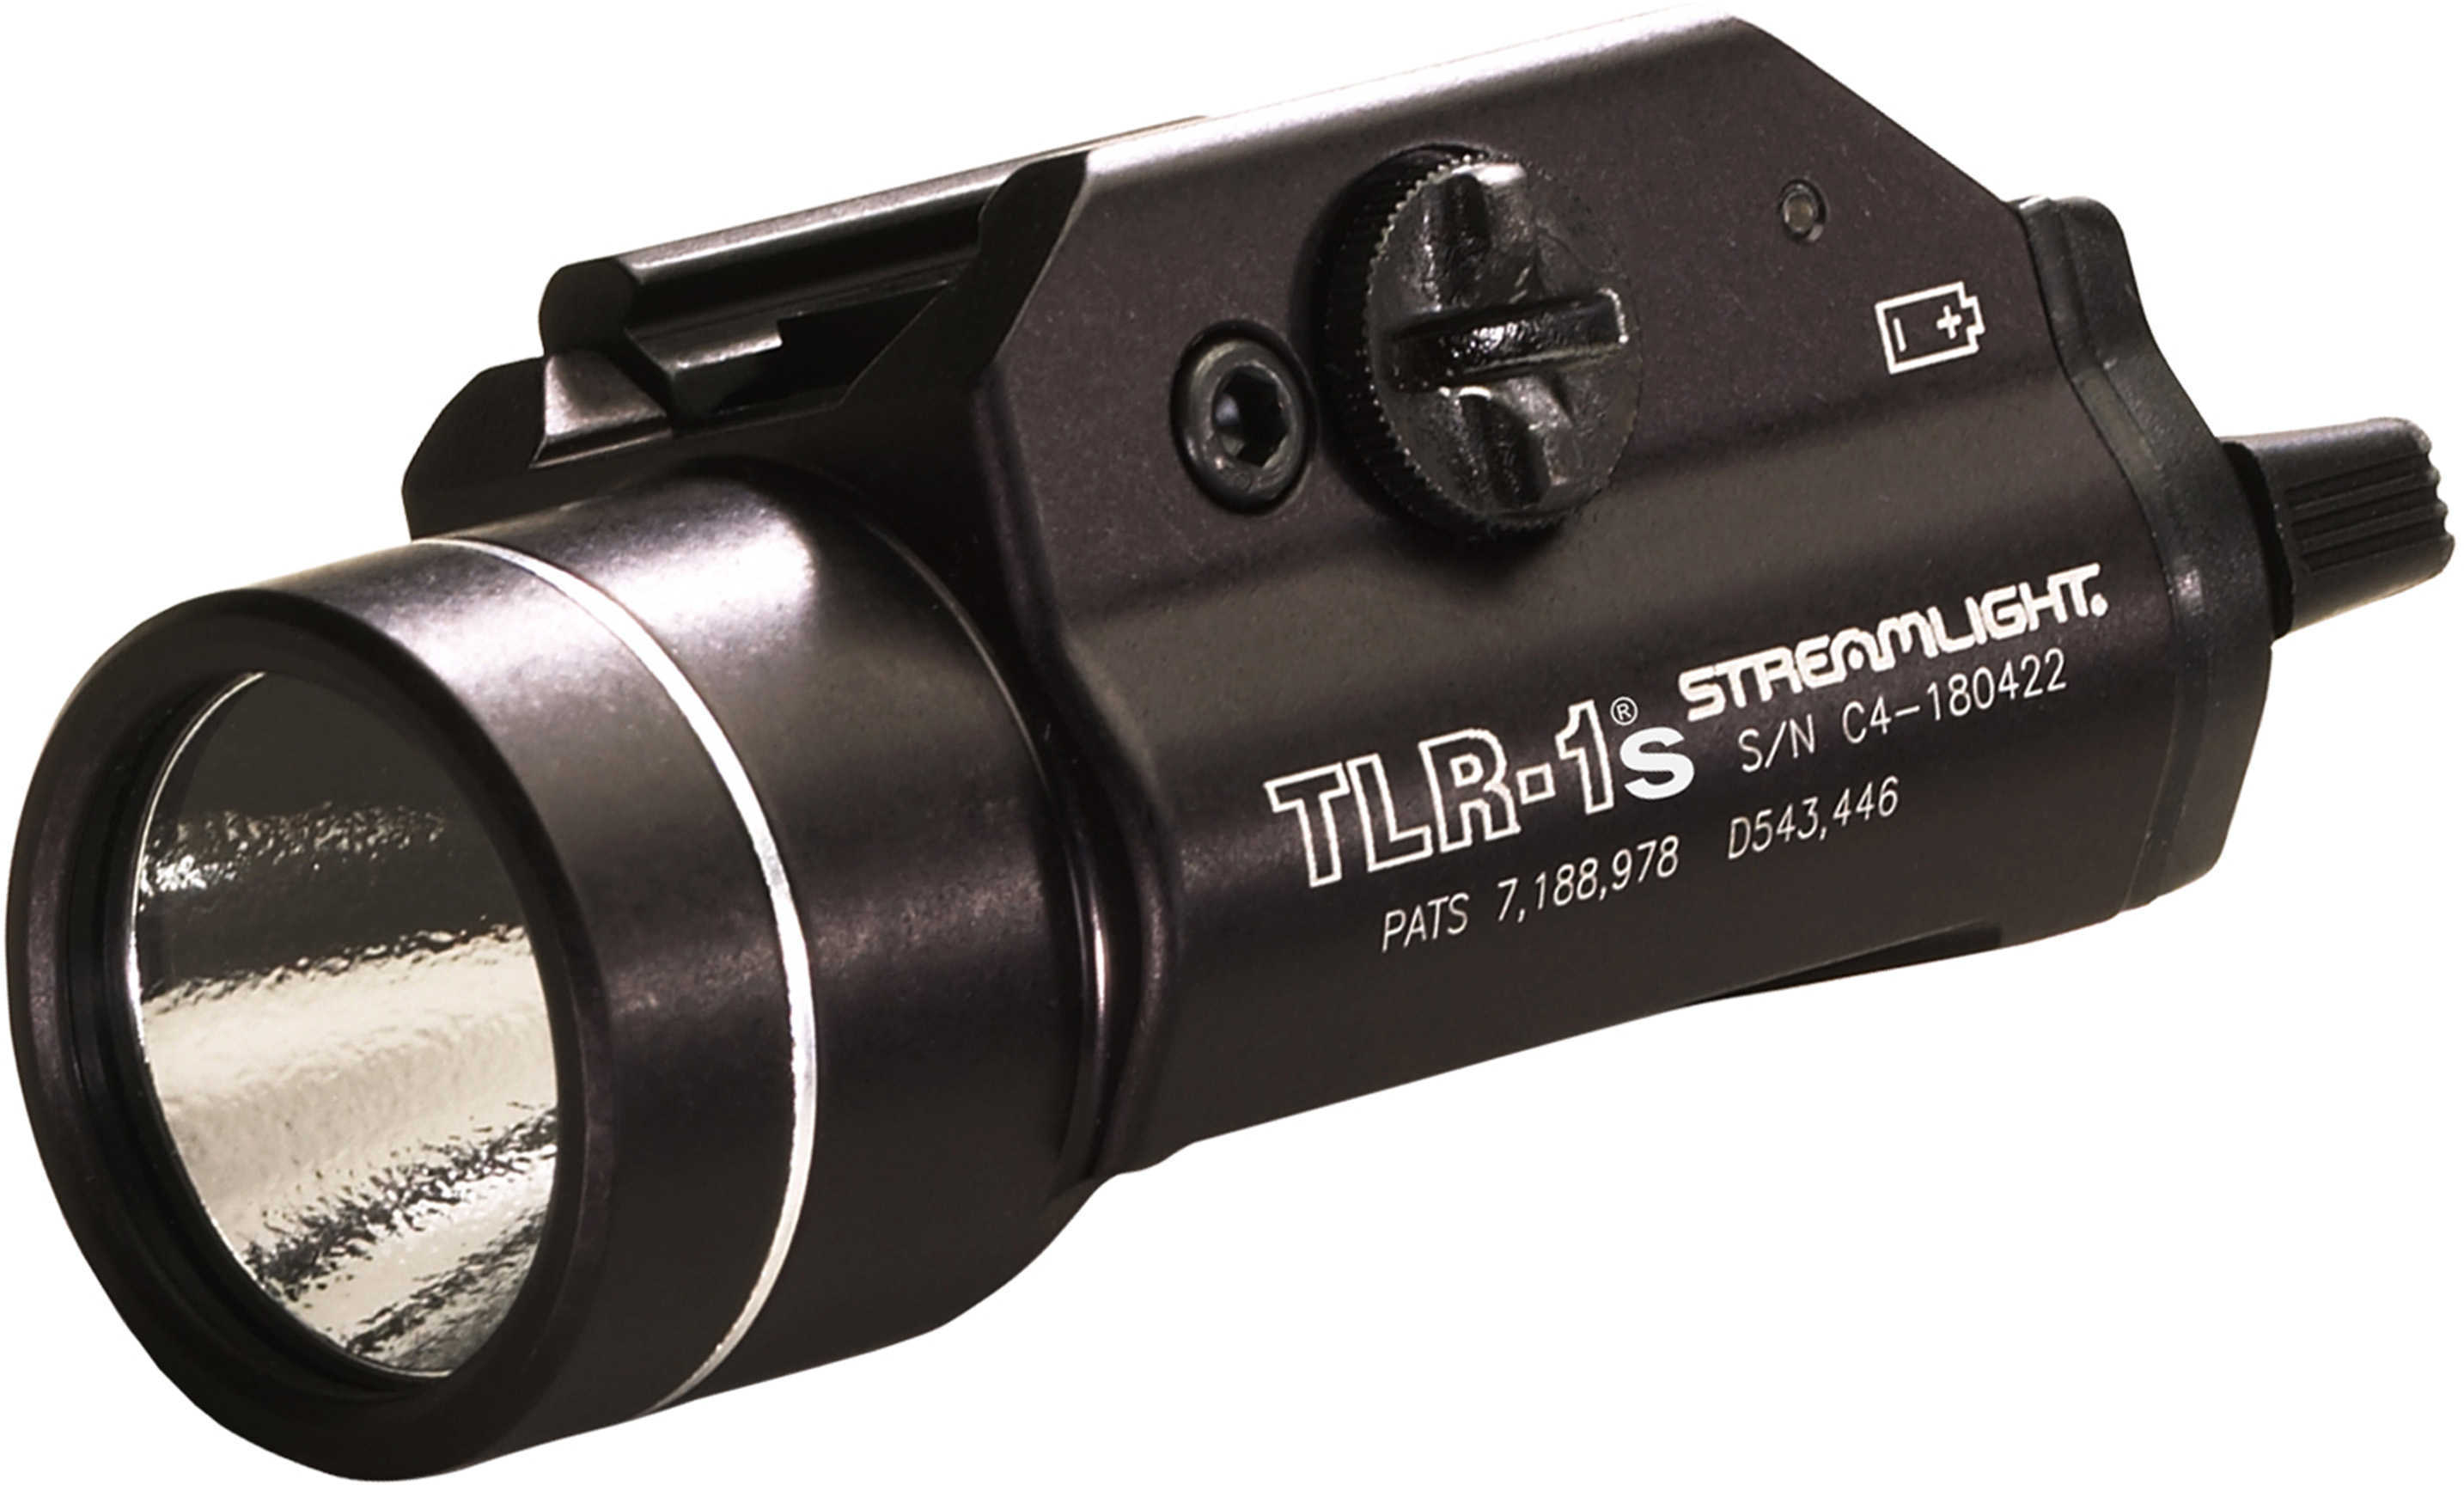 Streamlight TLR-1S C4 Led With 160 Lumen Output - Strobe Model User Programmable Enable/Disable Up To 2.5